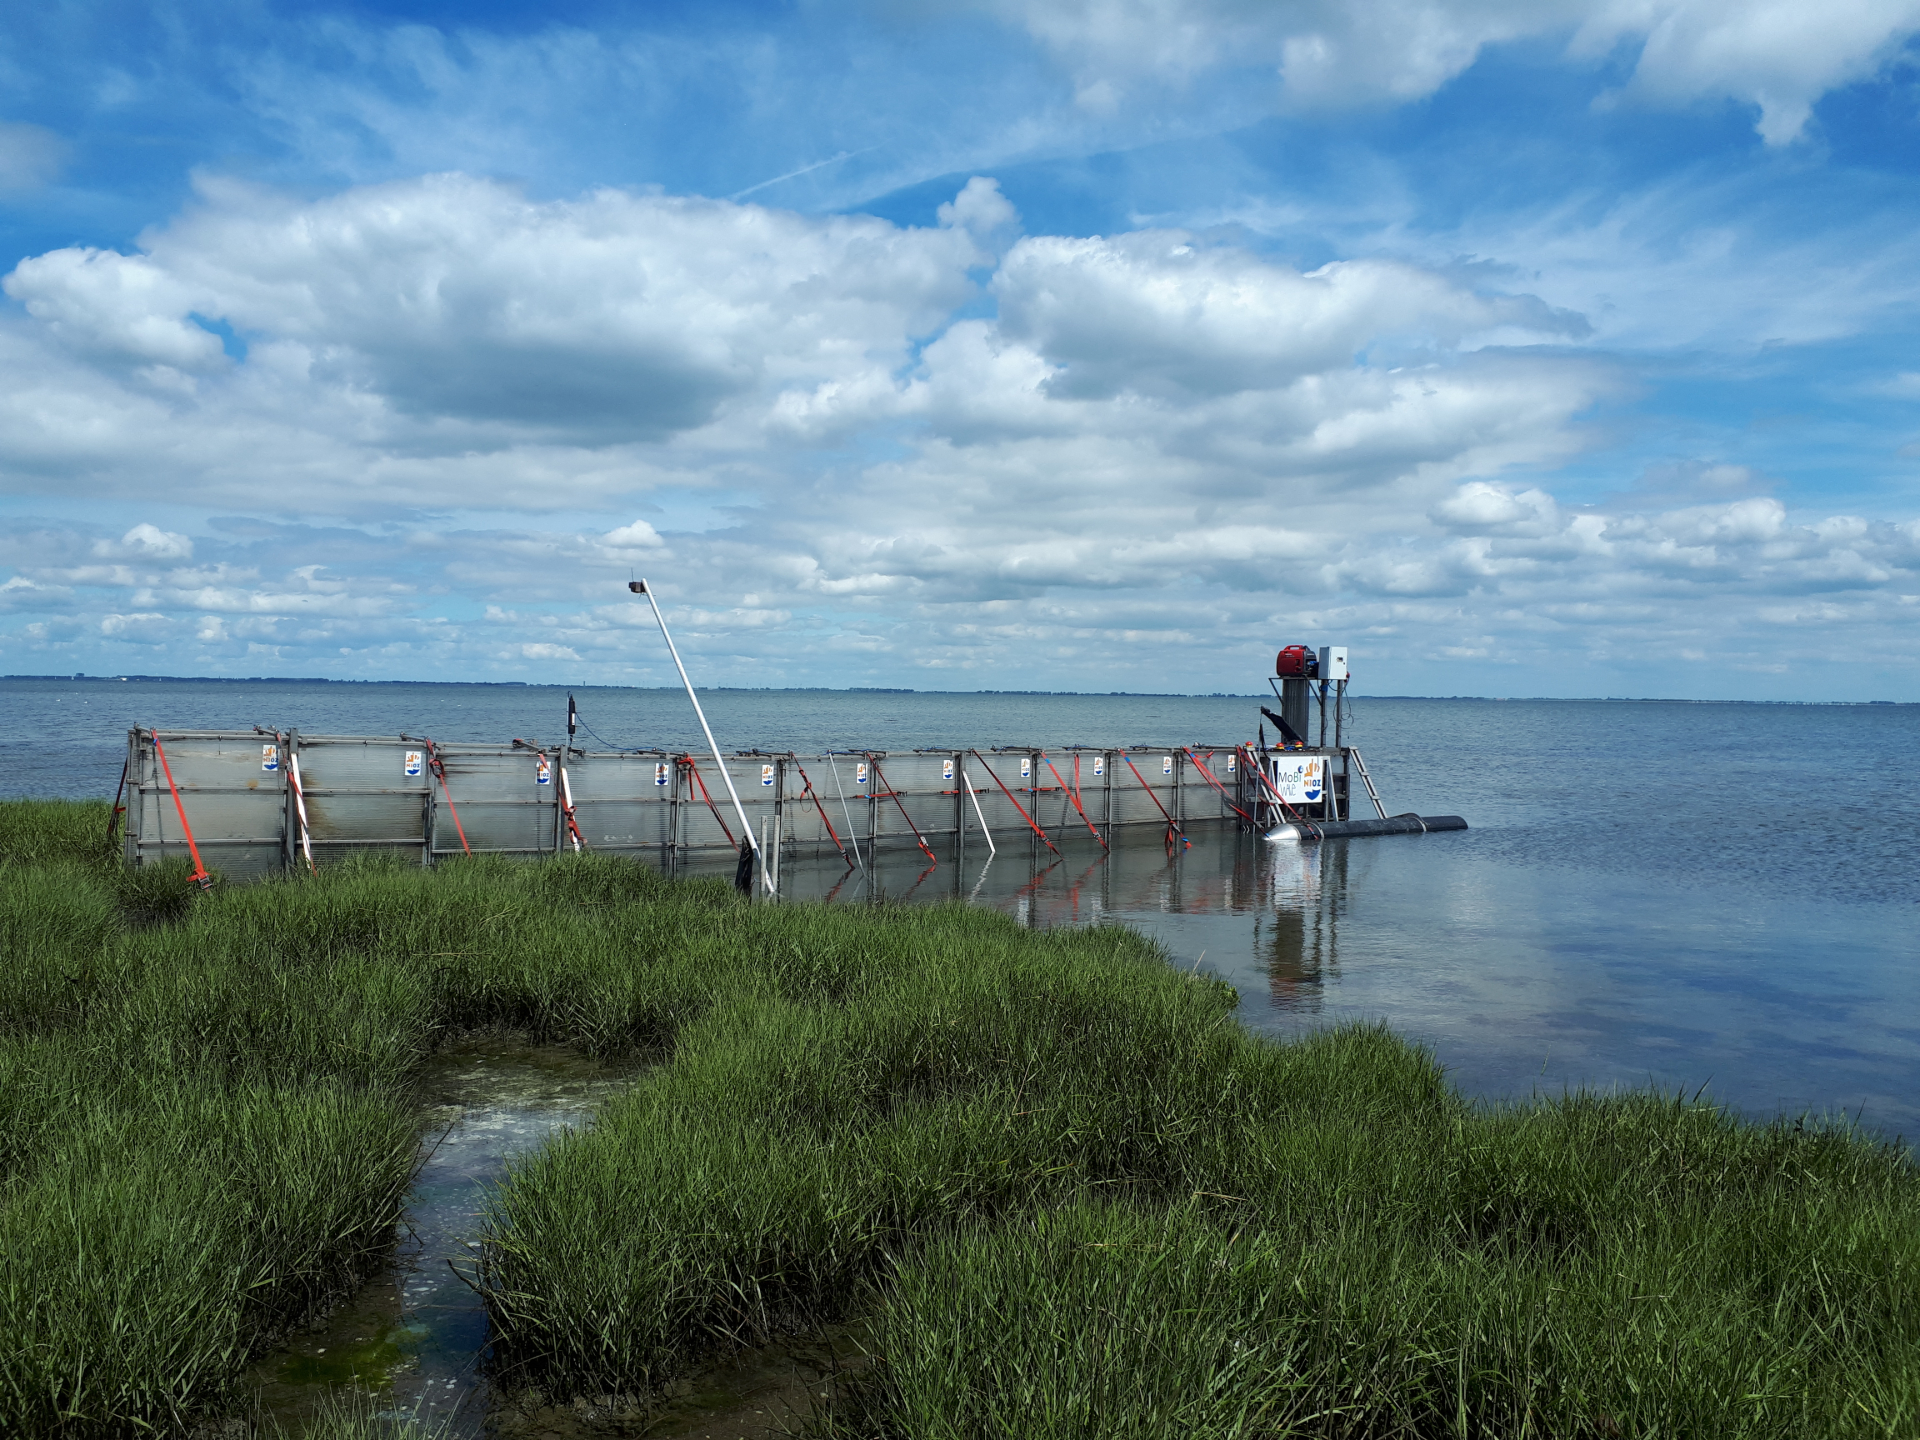 A mobile wave generator is used to study cliff formation at the salt marsh boundary